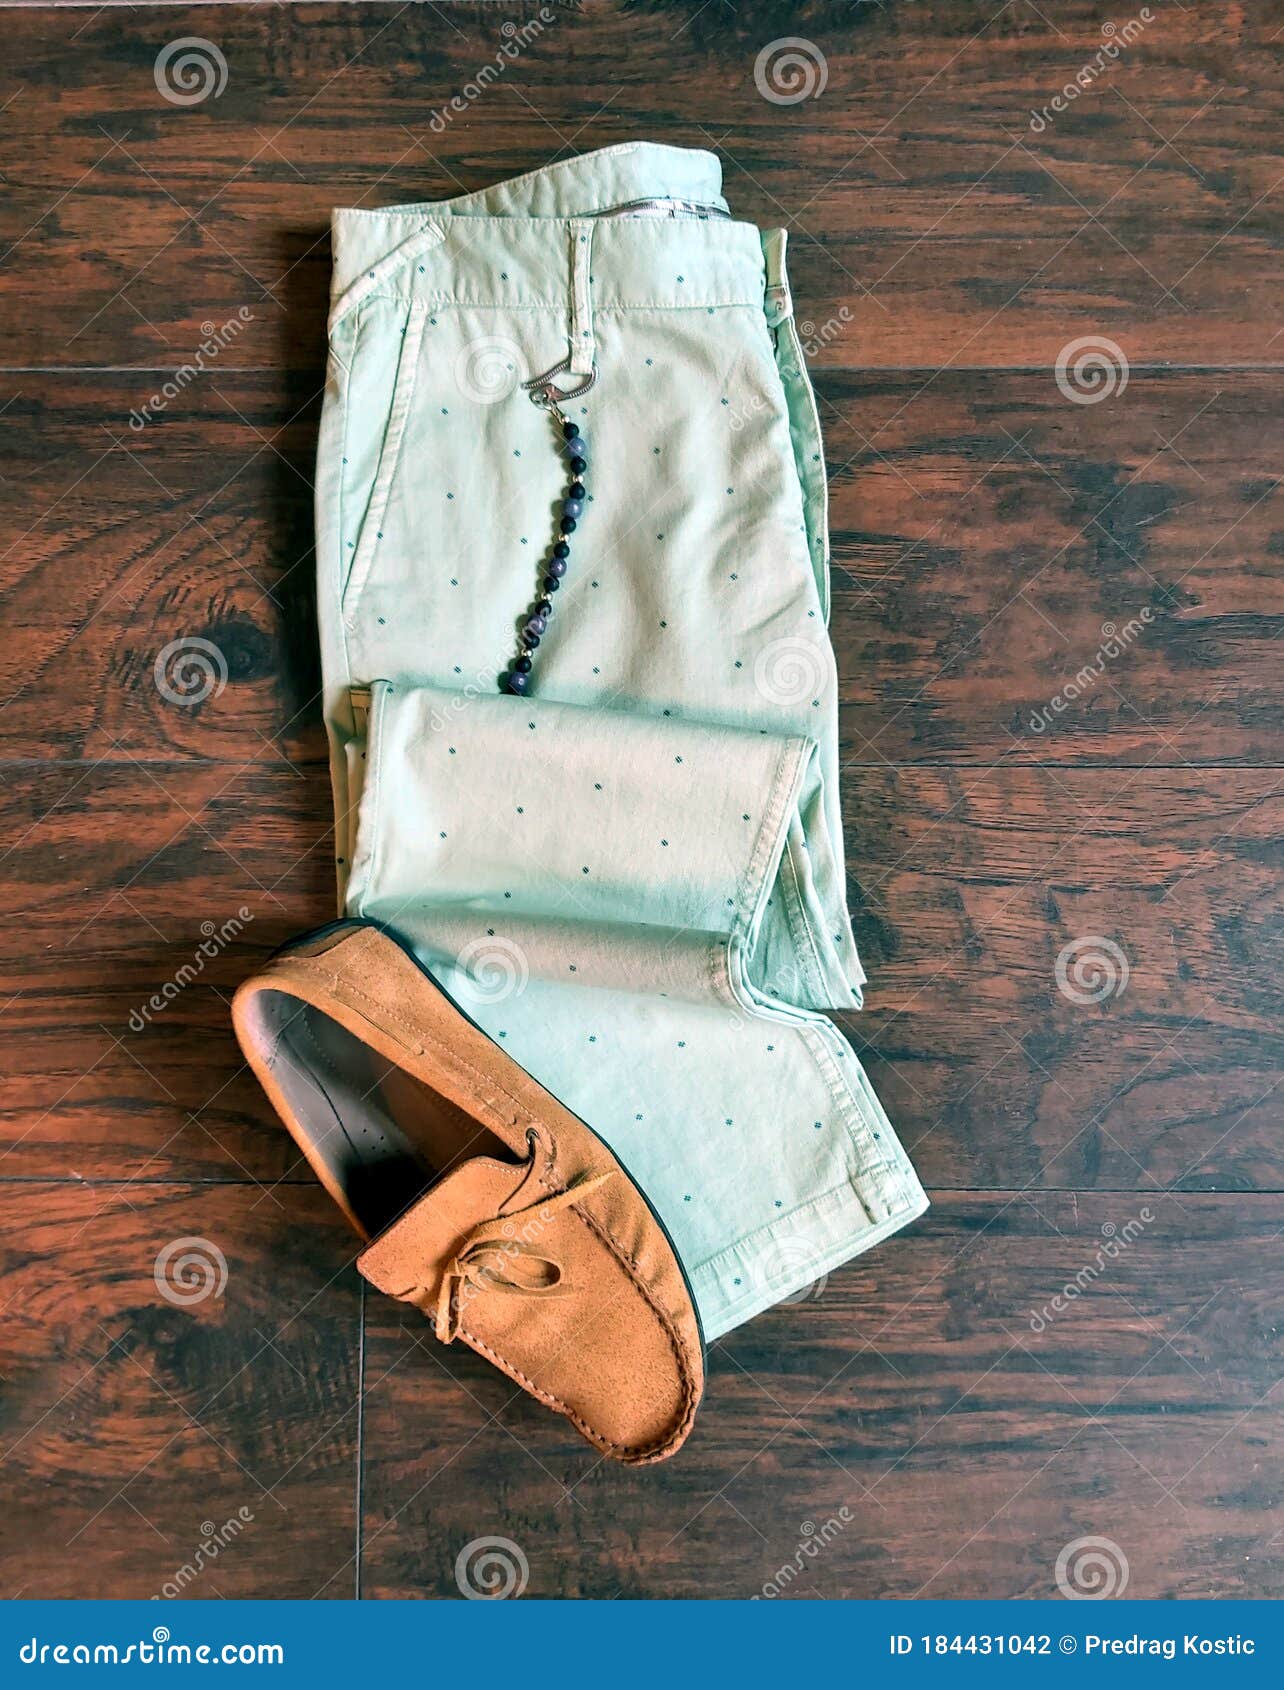 Men`s Trousers and Shoes Insulated on Wood Stock Photo - Image of ...